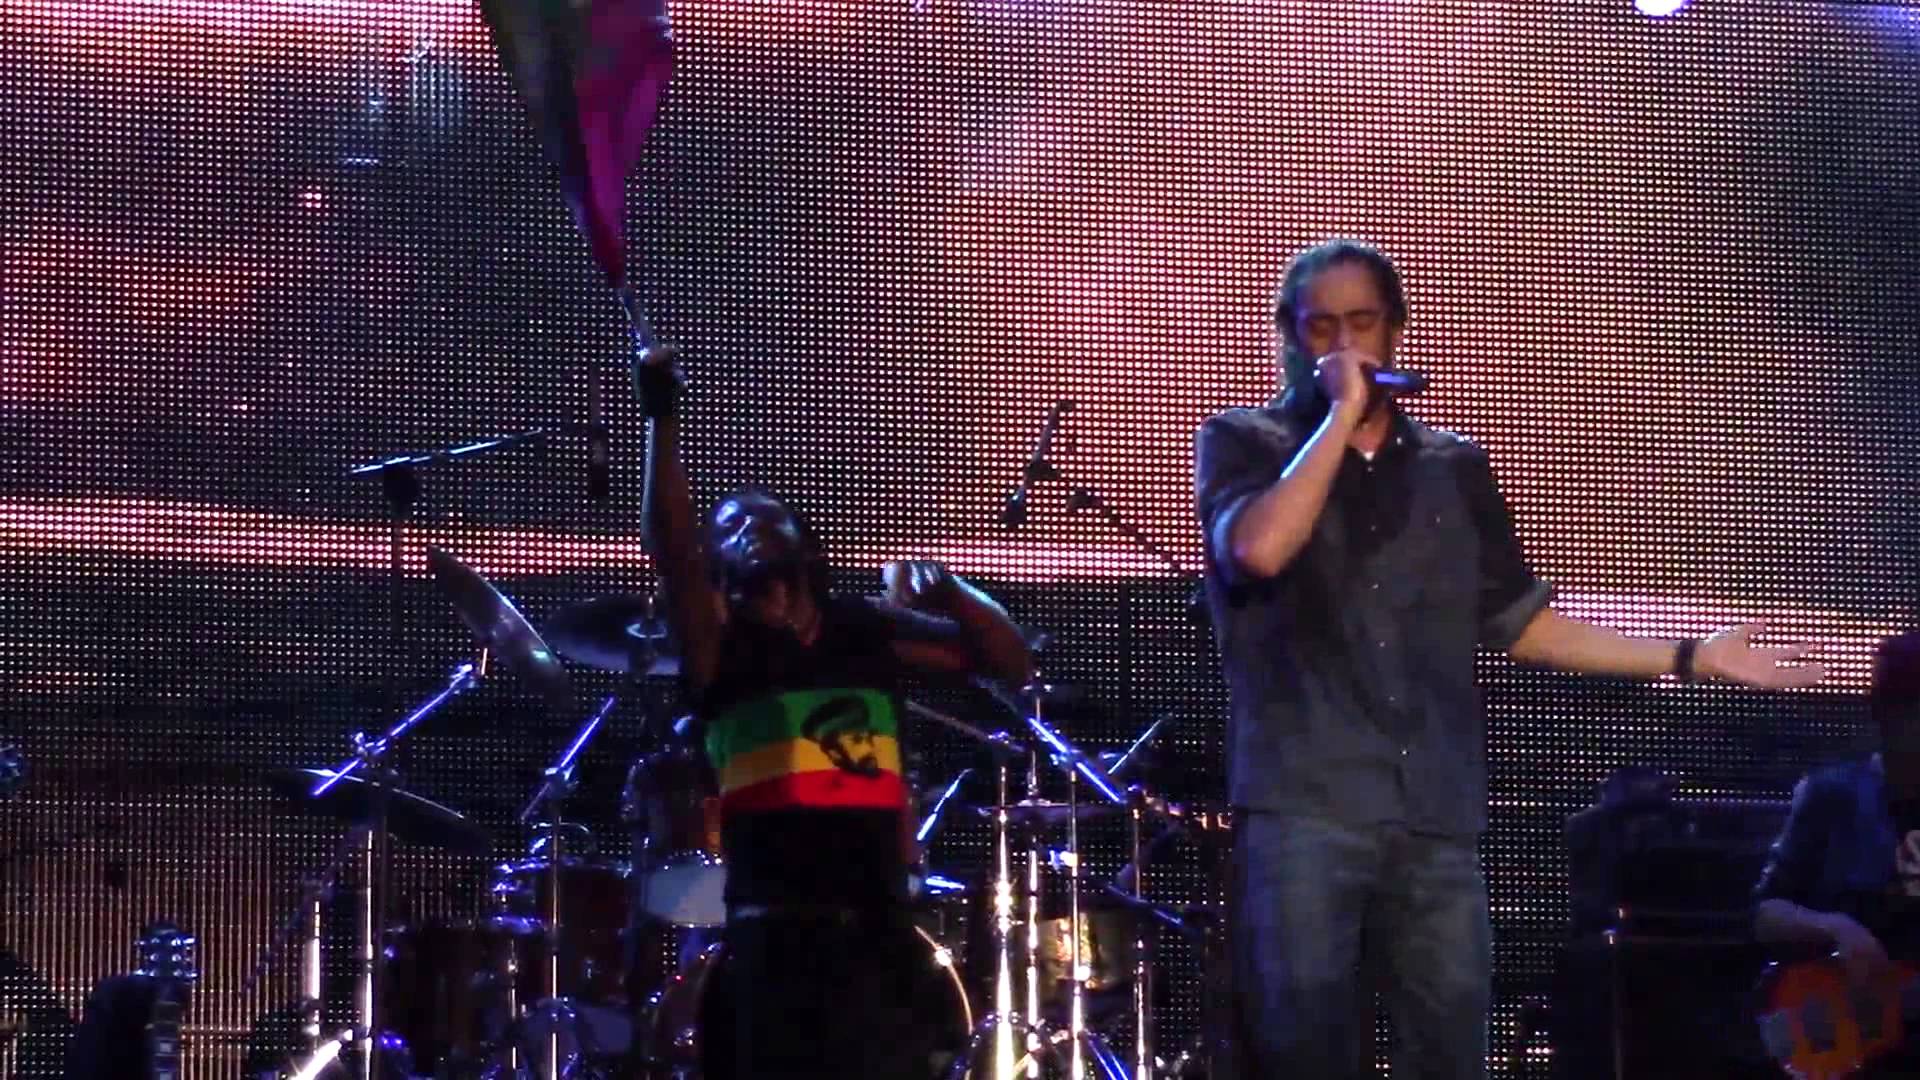 DAMIAN "JR. GONG" MARLEY - ROMA LIVE CONCERT - ROCK IN ROMA - 1 LUGLIO 2015